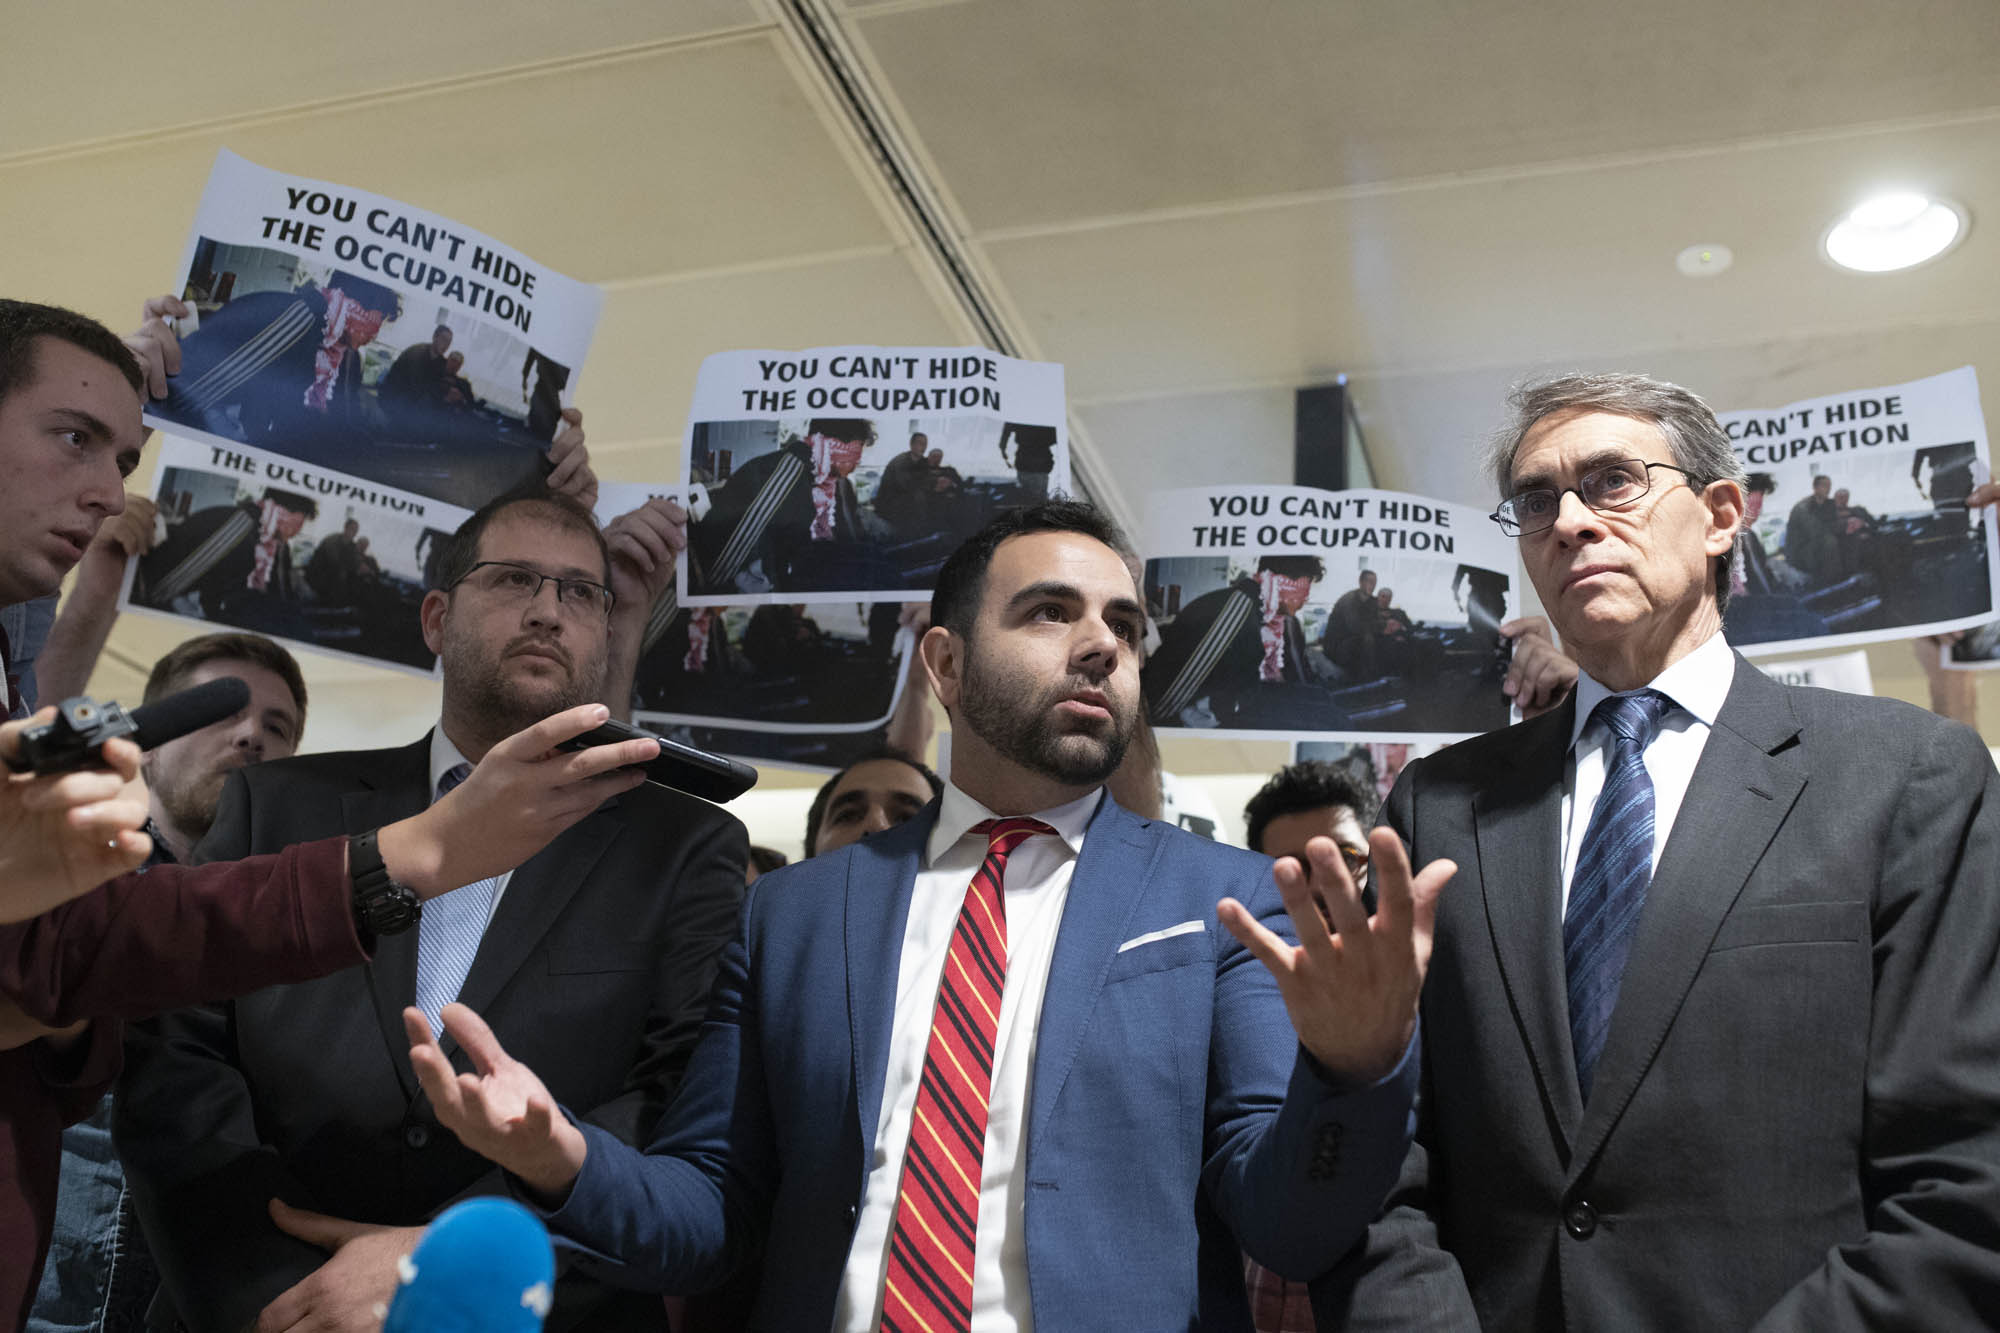 Human Rights Watch Israel and Palestine Director Omar Shakir speaks to press ahead of his deportation from Israel, flanked by HRW head Kenneth Roth, right, and attorney Michael Sfard, left, November 25, 2019 (Oren Ziv/Activestills.org).